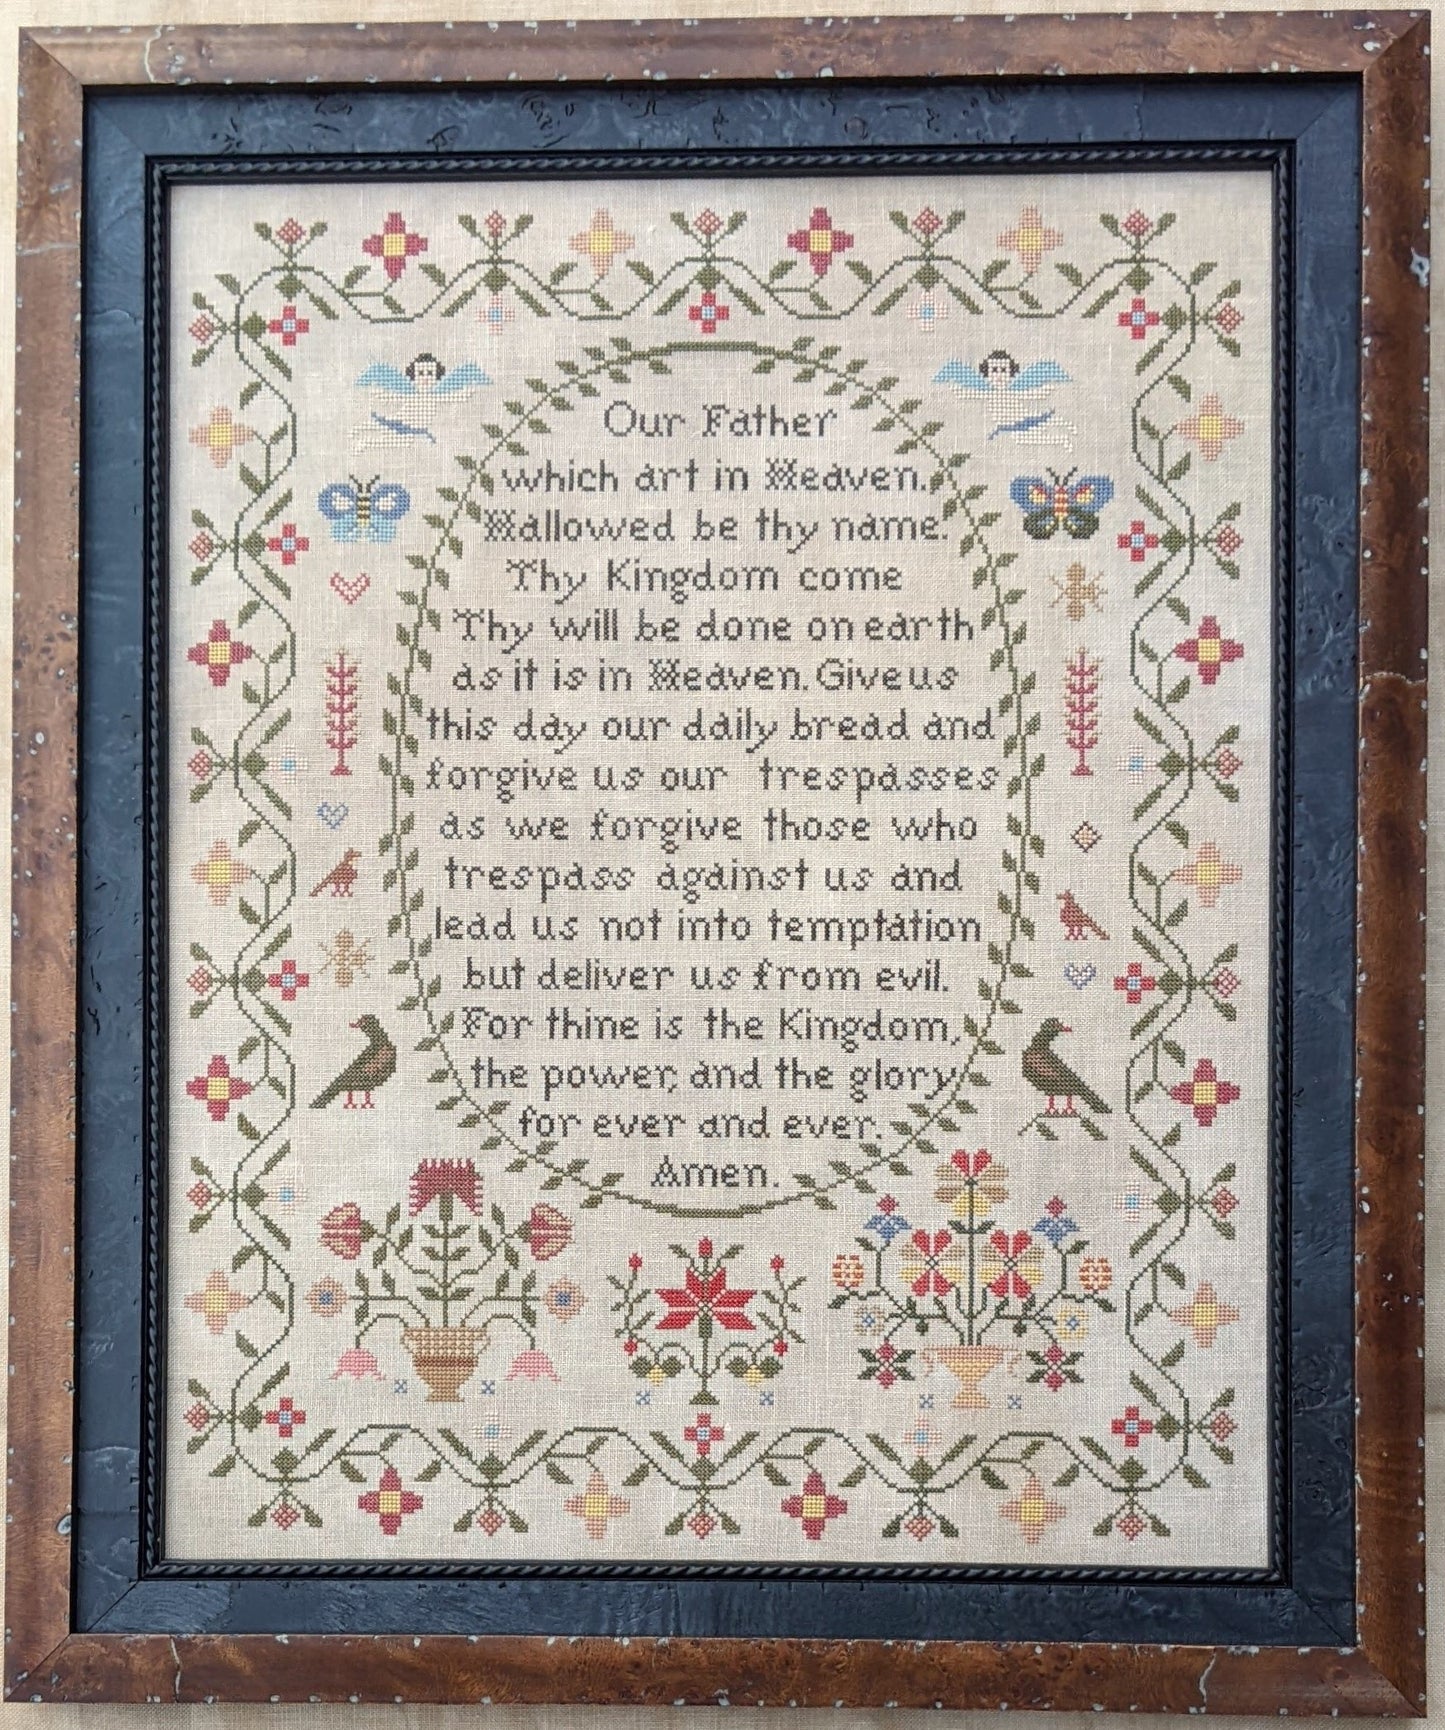 The Lord's Prayer by Lila's Studio